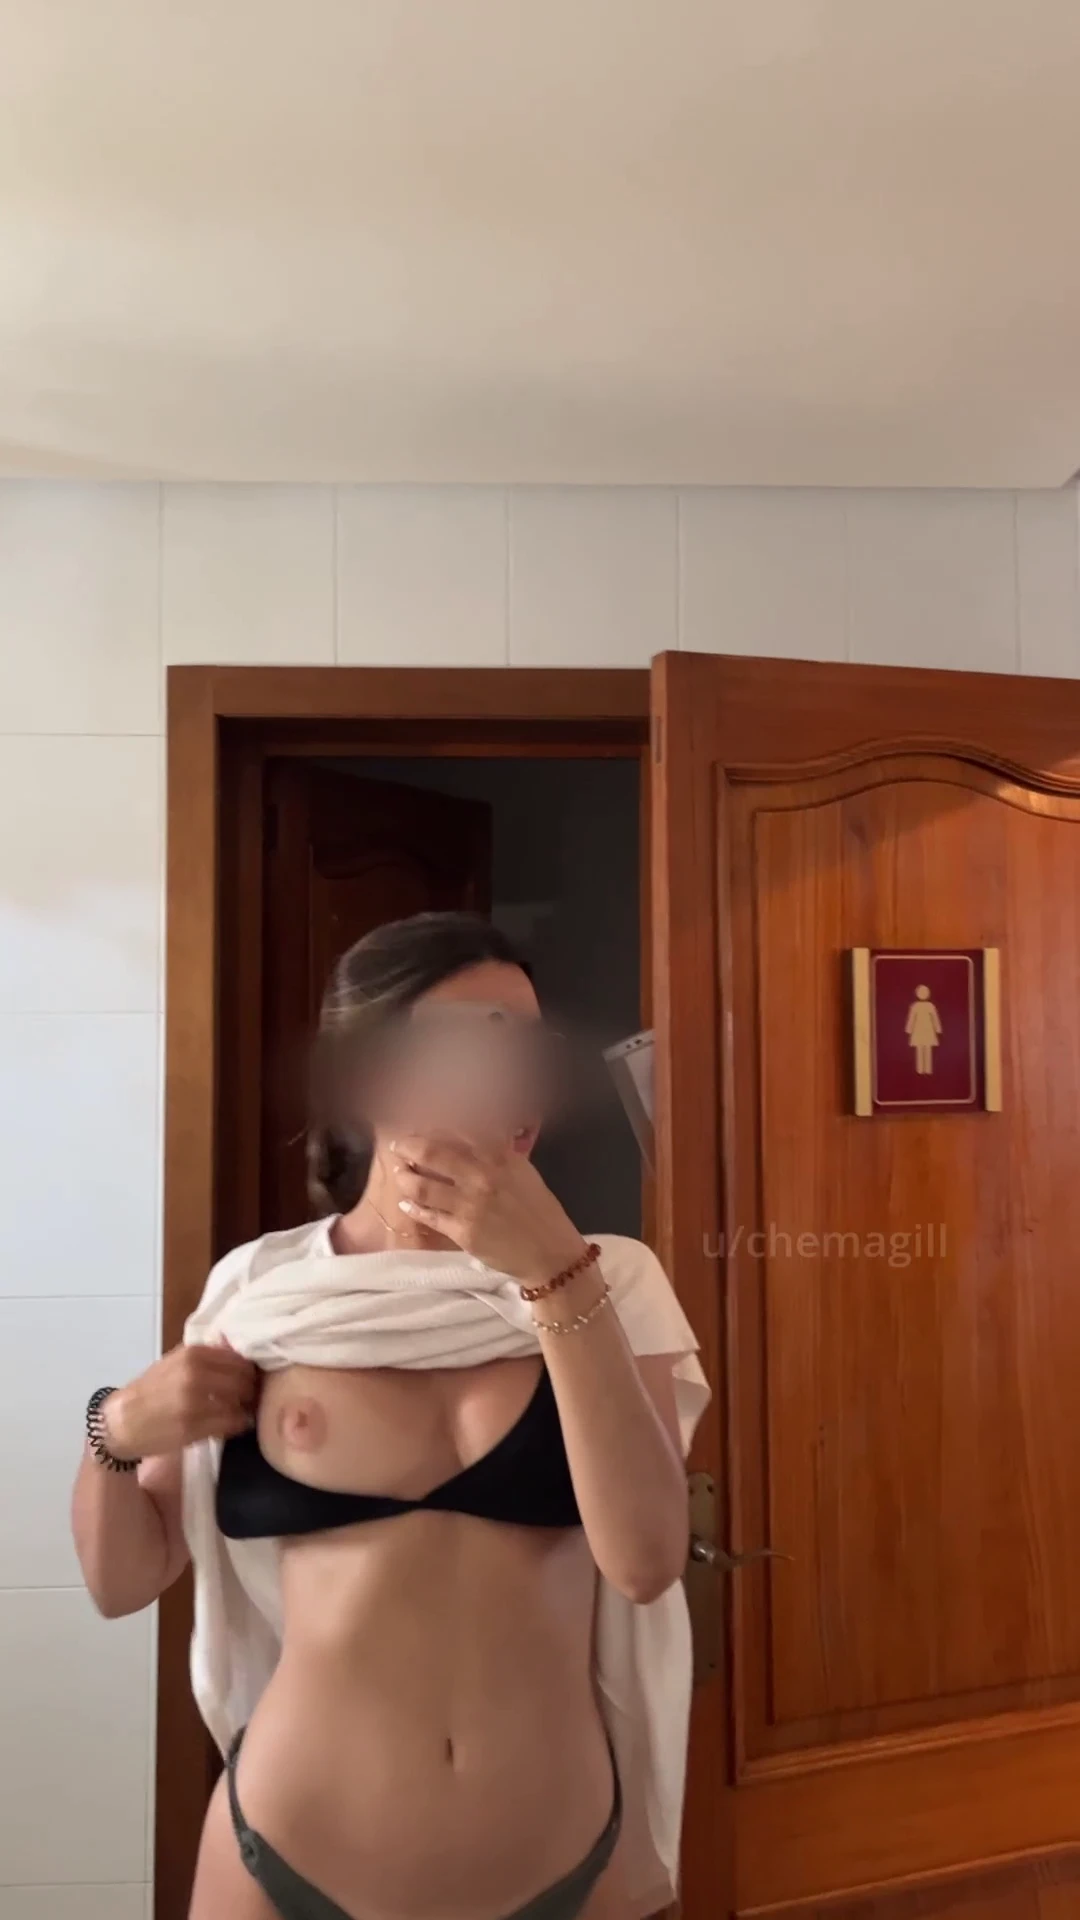 The best place to expose your tits is on the hotel's lobby toilet